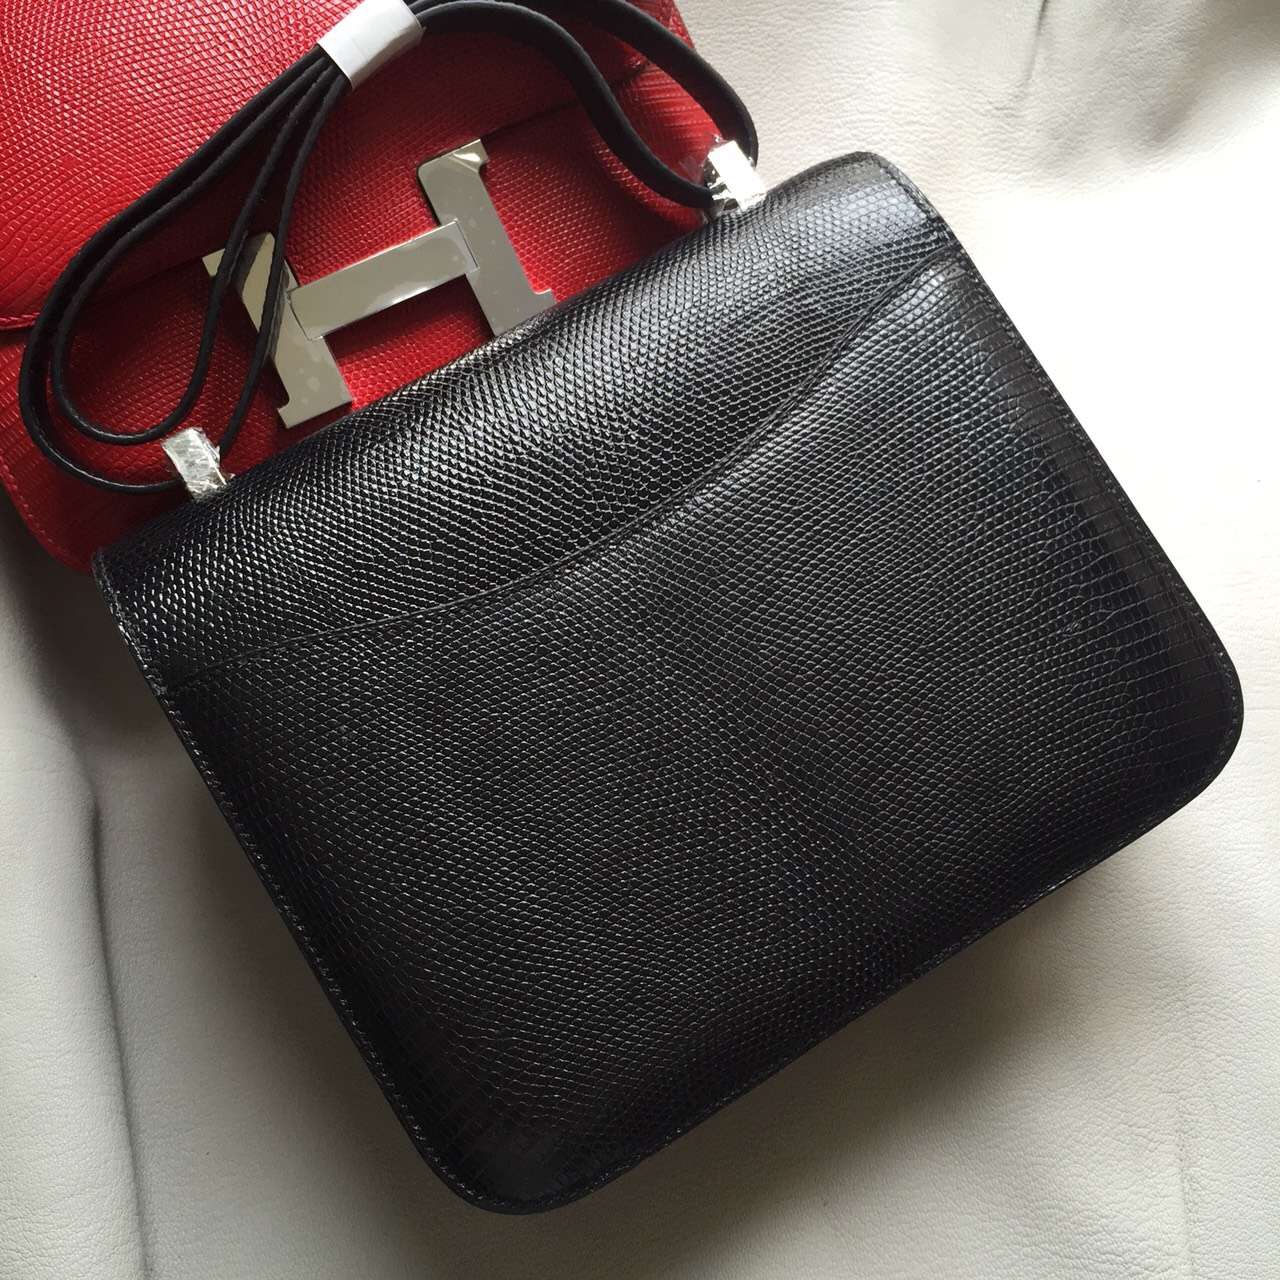 Hand Stitching Hermes Shiny Lizard Leather Constance Bag in CK89 Black